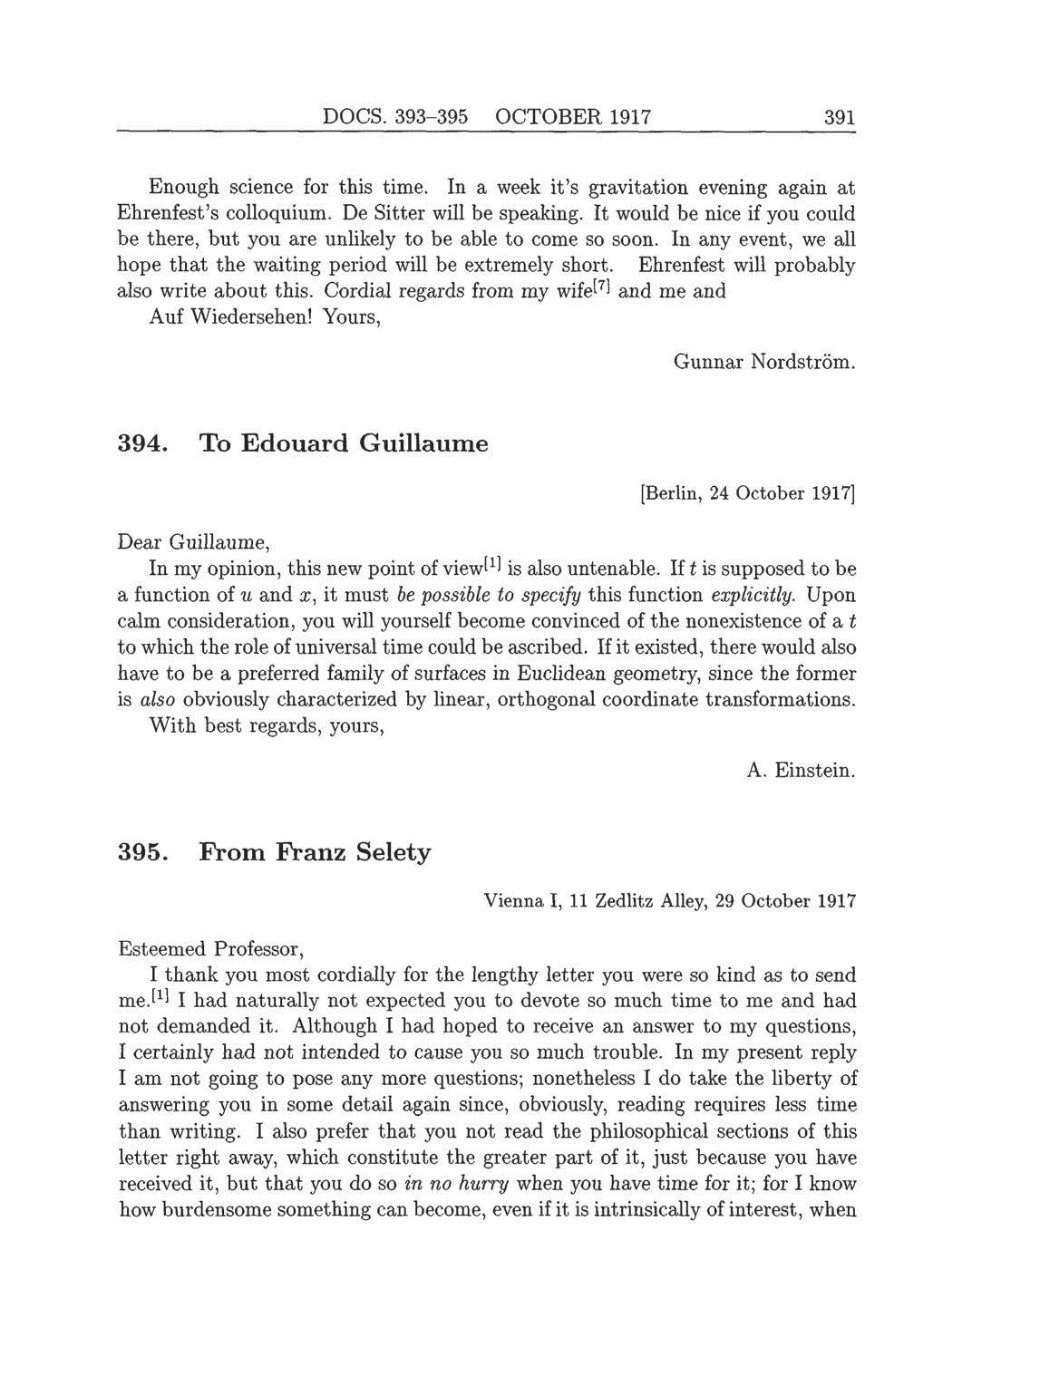 Volume 8: The Berlin Years: Correspondence, 1914-1918 (English translation supplement) page 391